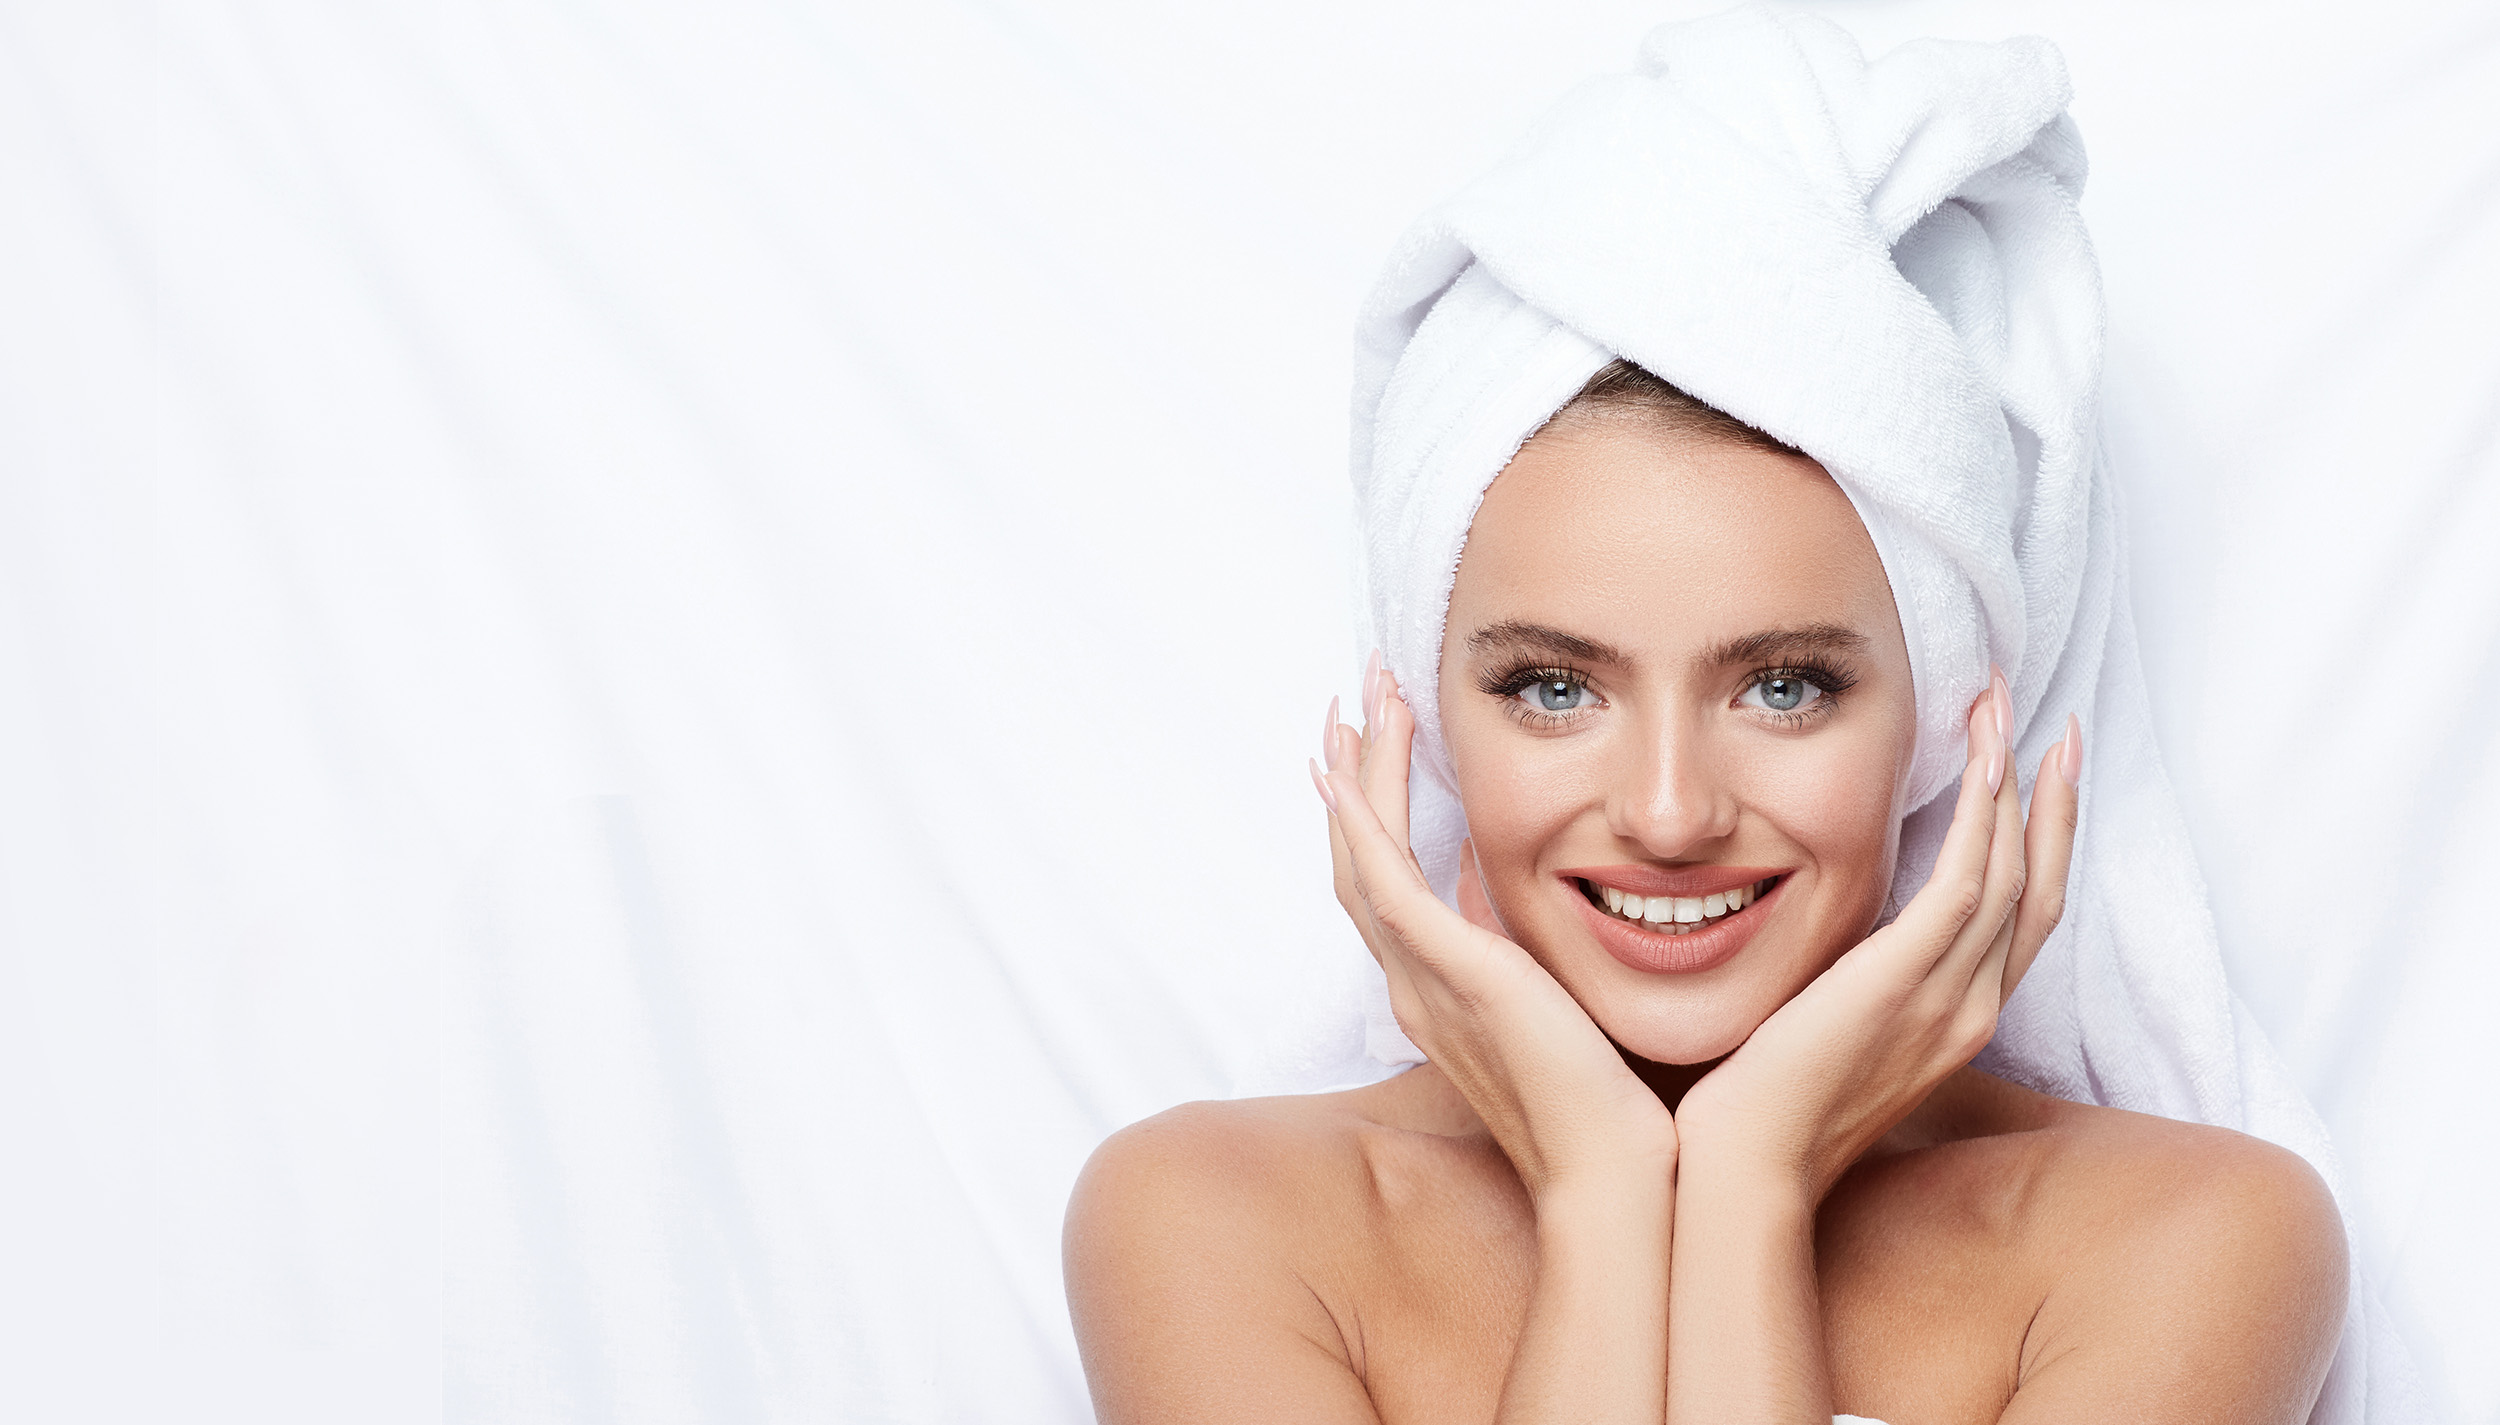 HydraFacial™ is the perfect <br>treatment for all skin types!